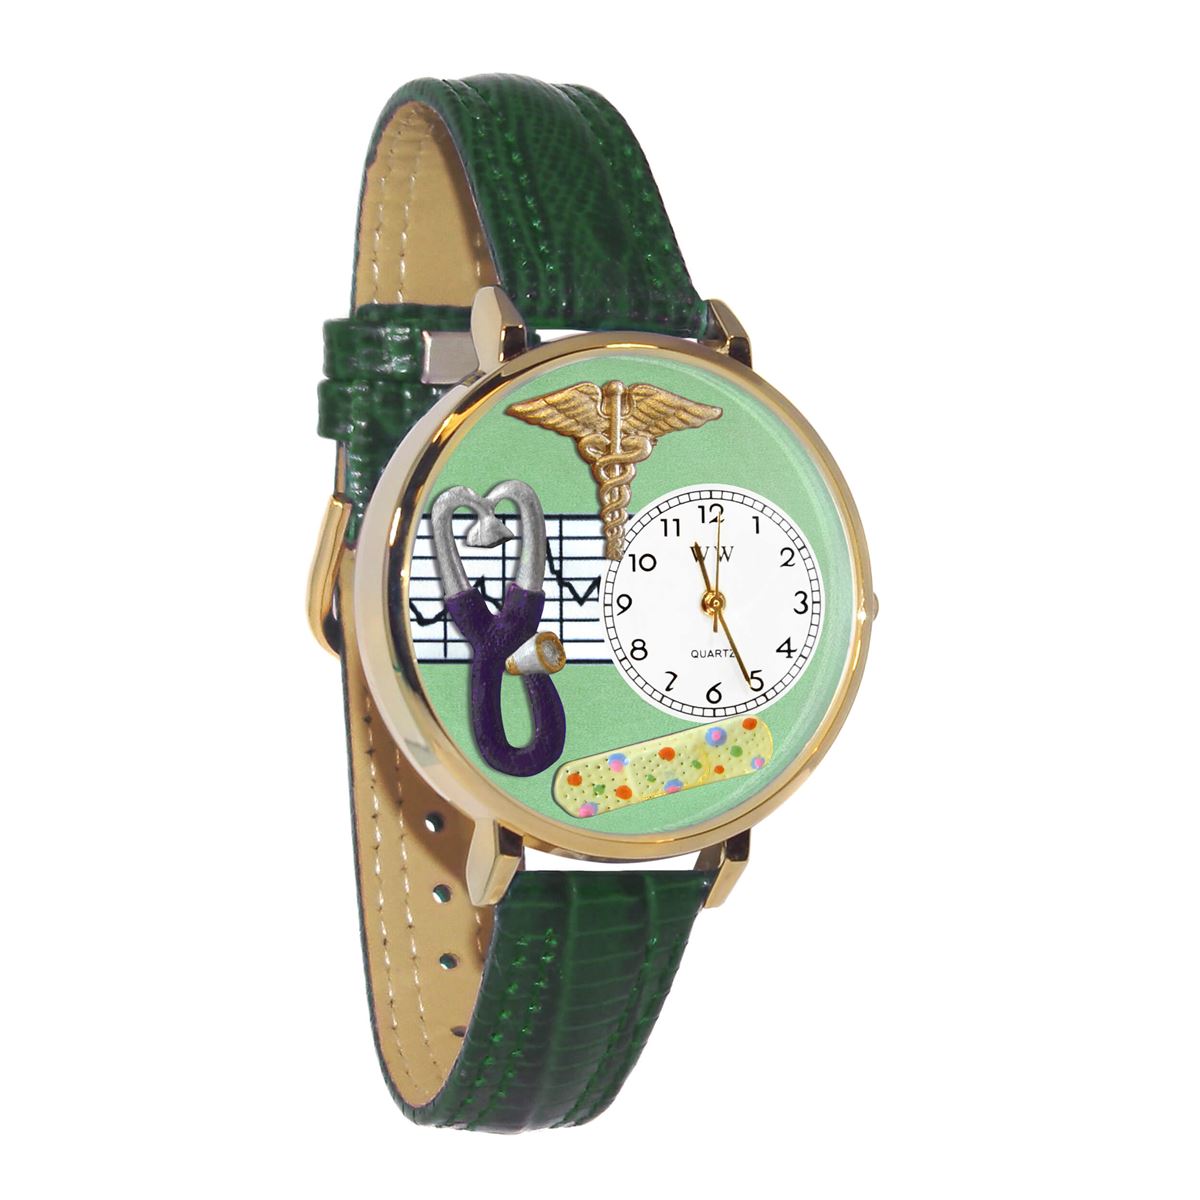 Whimsical Gifts | Nurse Stethoscope Green 3D Watch Large Style | Handmade in USA | Professions Themed | Nurse | Novelty Unique Fun Miniatures Gift | Gold Finish Green Leather Watch Band